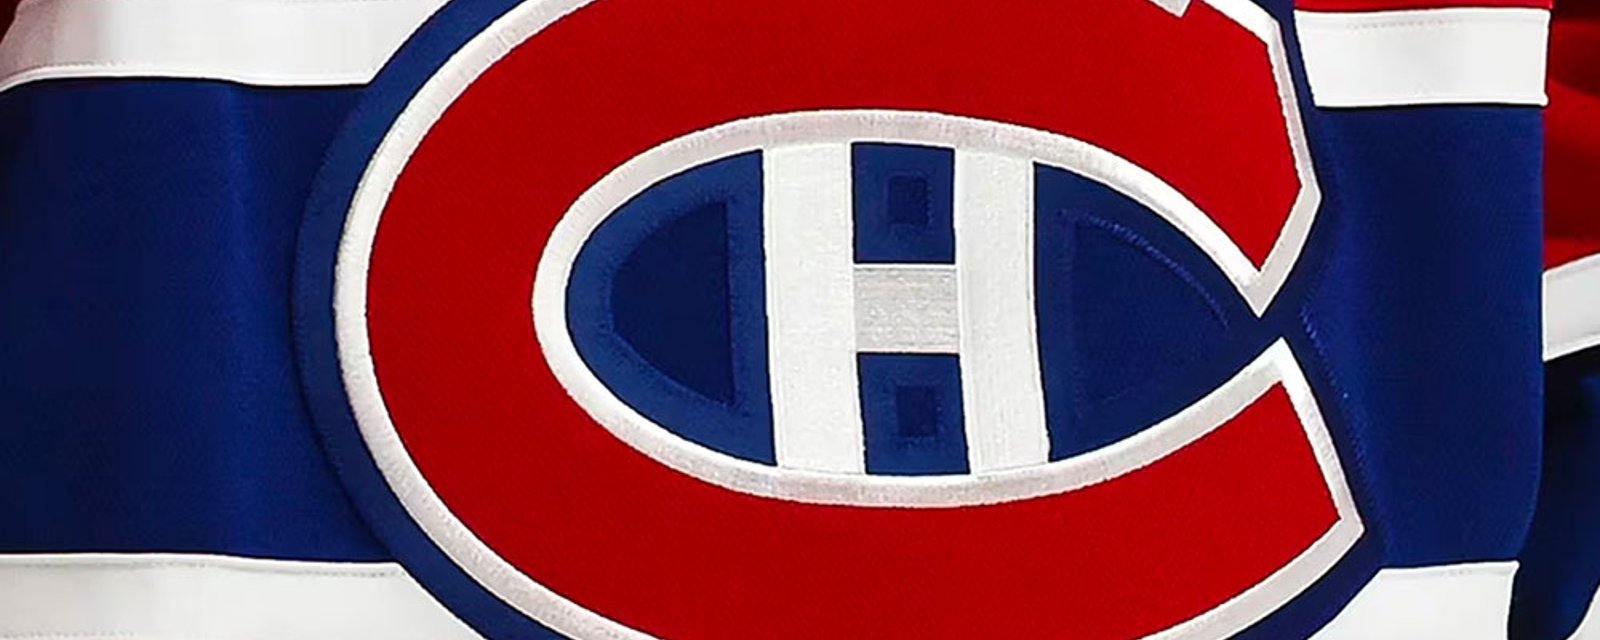 Habs sign two free agents, including former 1st round pick